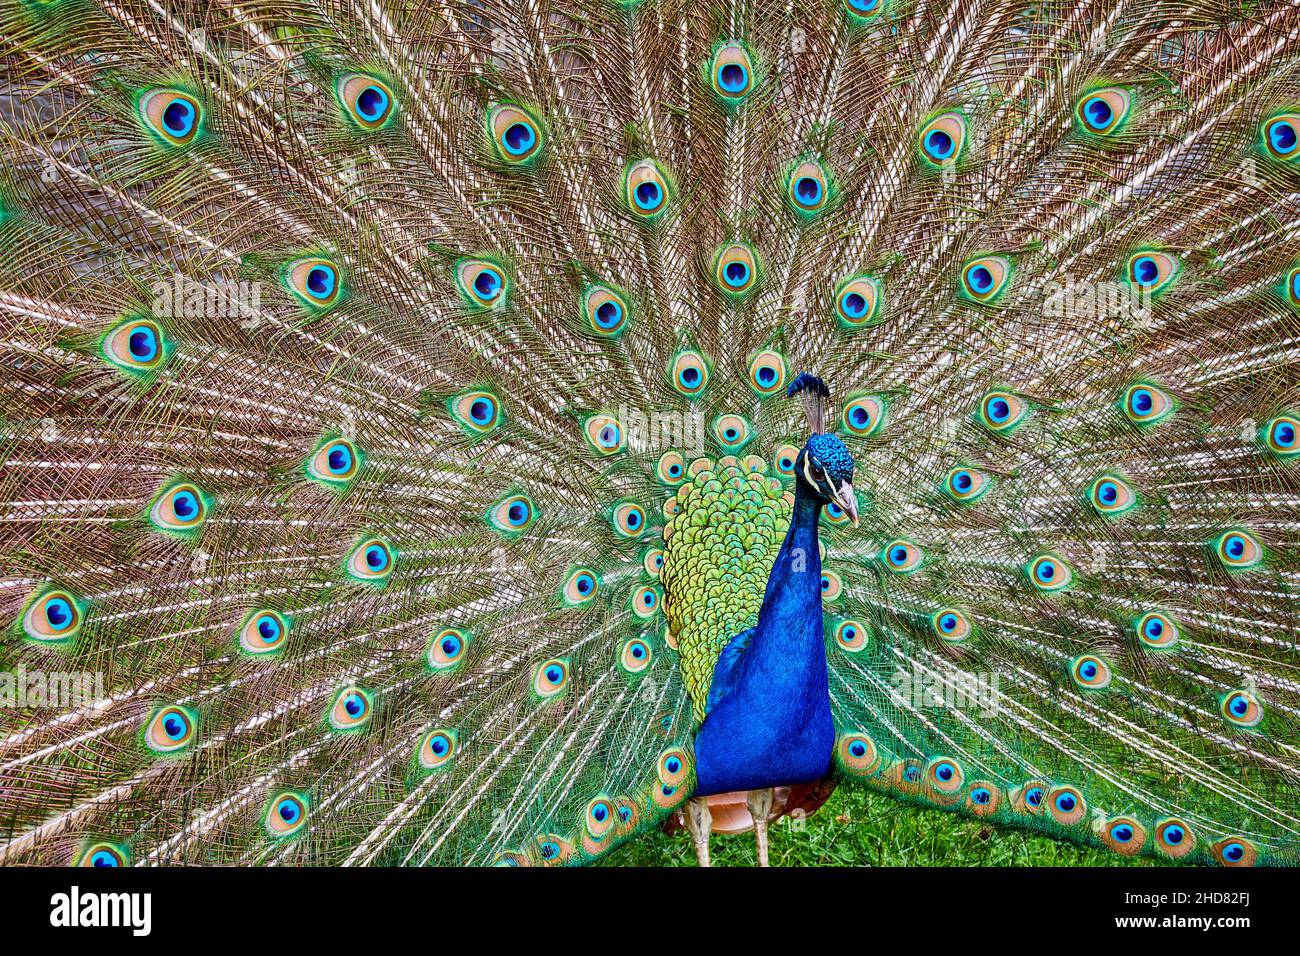 Close up of an indian peacock, Pavo cristatus, with its tail feathers raised in display. Stock Photo